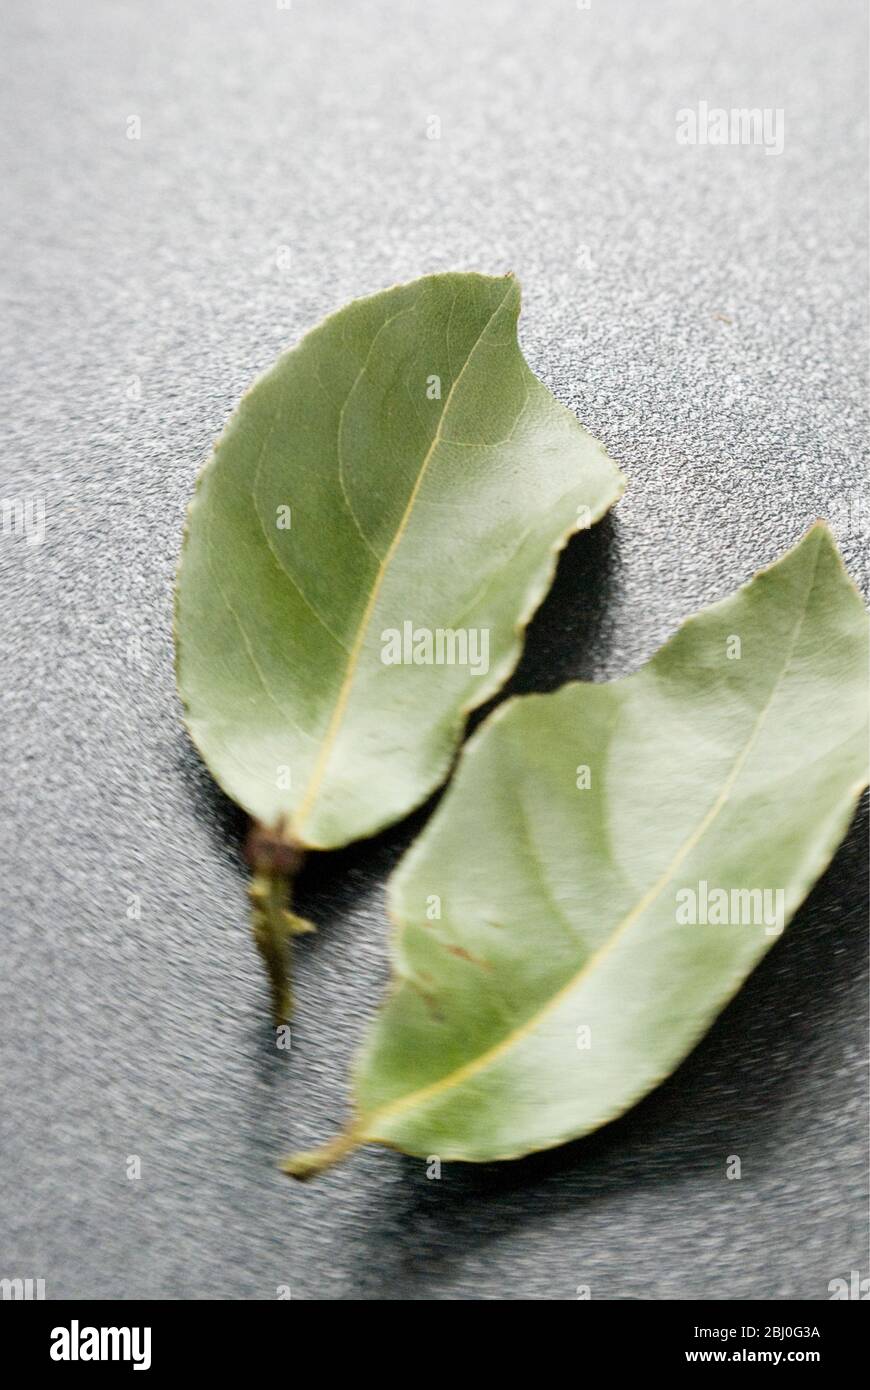 Bay leaves on a dark plastic surface. Bay leaf (Greek Daphni, Romanian Foi de Dafin) is the aromatic leaf of several species of the Laurel family (Lau Stock Photo